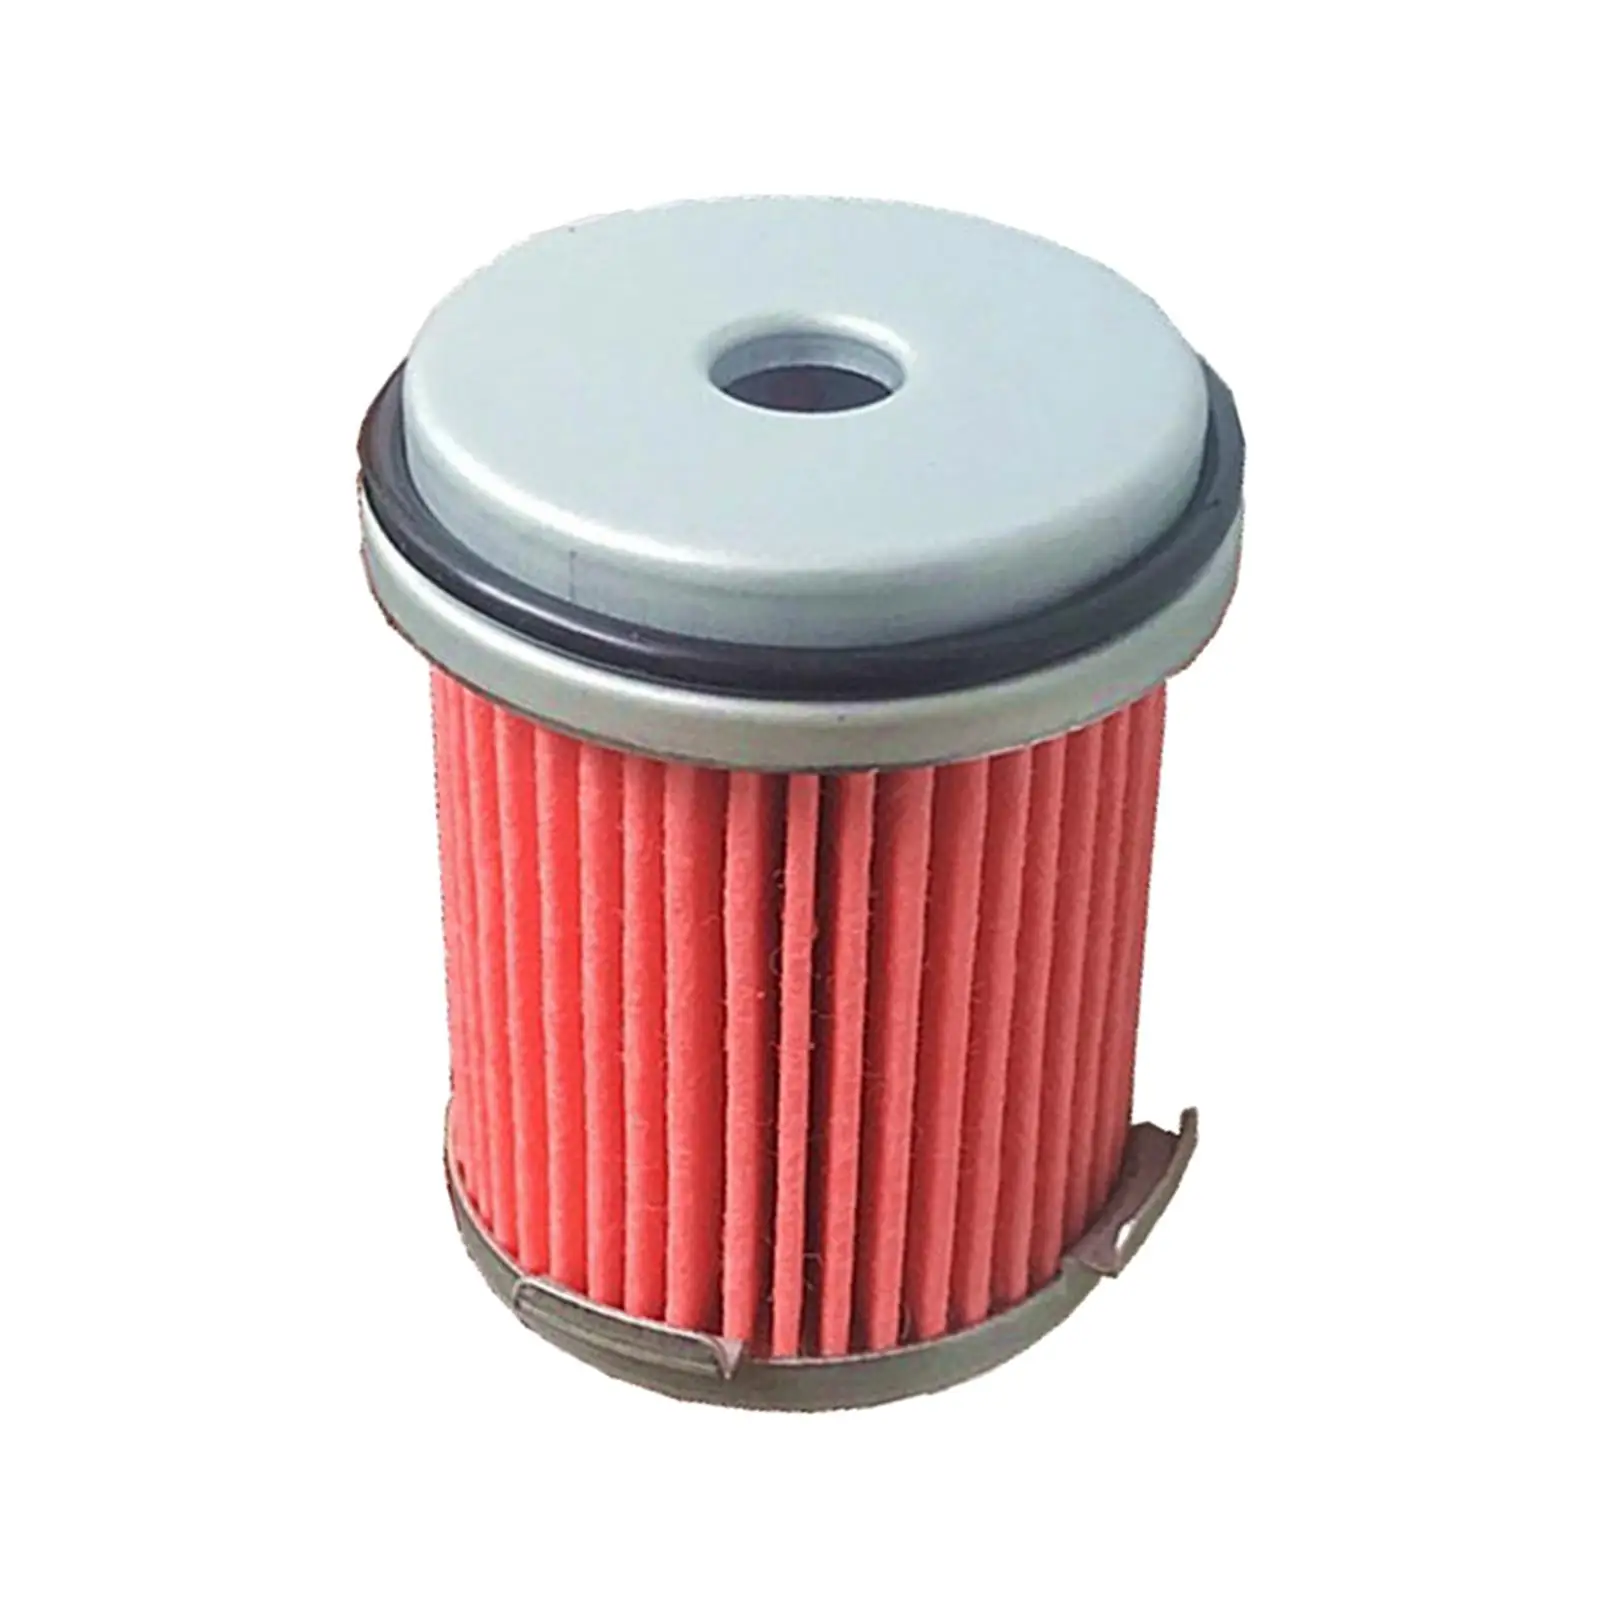 Auto Transmission Filter 25450-p4V-013 25450P4V013 Directly Replace High Performance High Quality for Acura MDX RDX Tsx TL